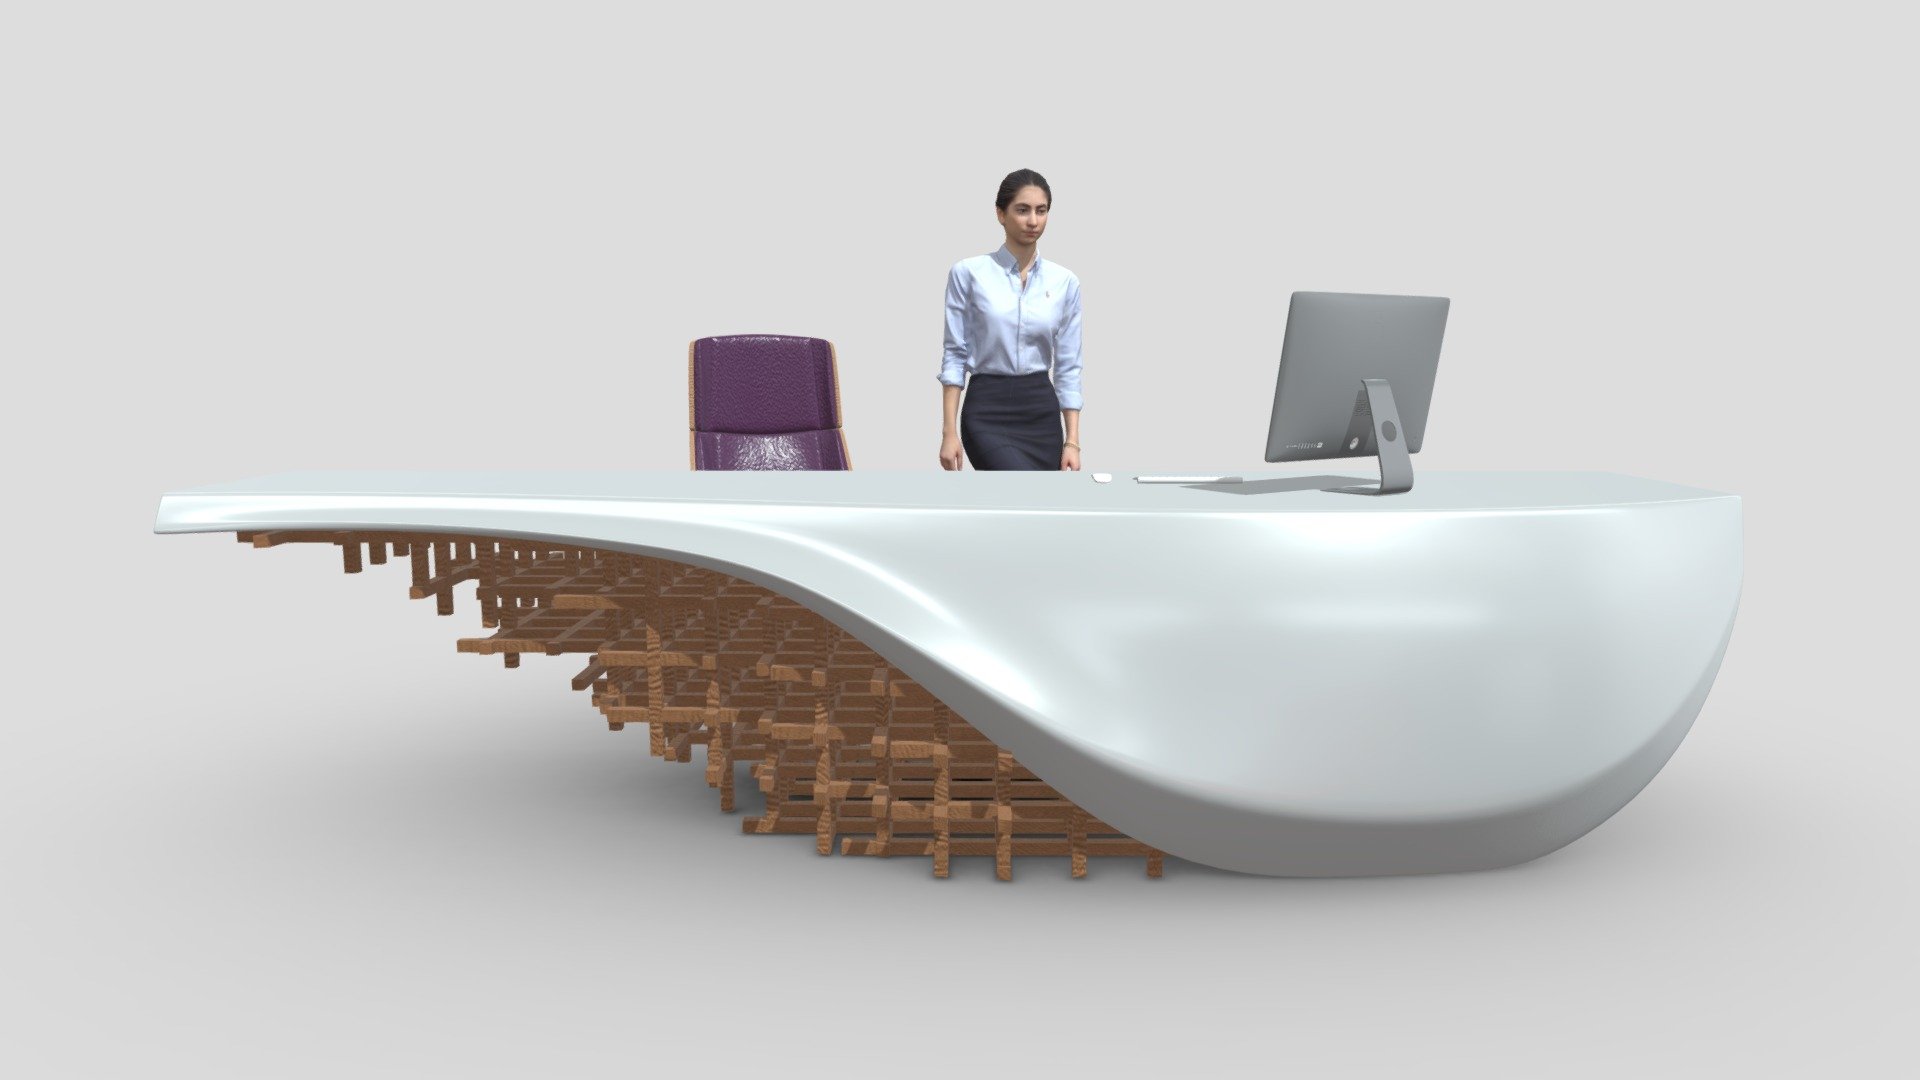 Reception Desk - 042

Native Format File : 3Ds Max 2020 &ndash; Rendering by Vray Next

File save as : 3Ds Max 2017 with converted all object to Editable Poly.

Exporting Formats :
Autodesk FBX ( .fbx ) and OBJ ( .obj &amp; .mtl ).

All 26 Texture maps are include as JPG.

Support 24/7 3d model